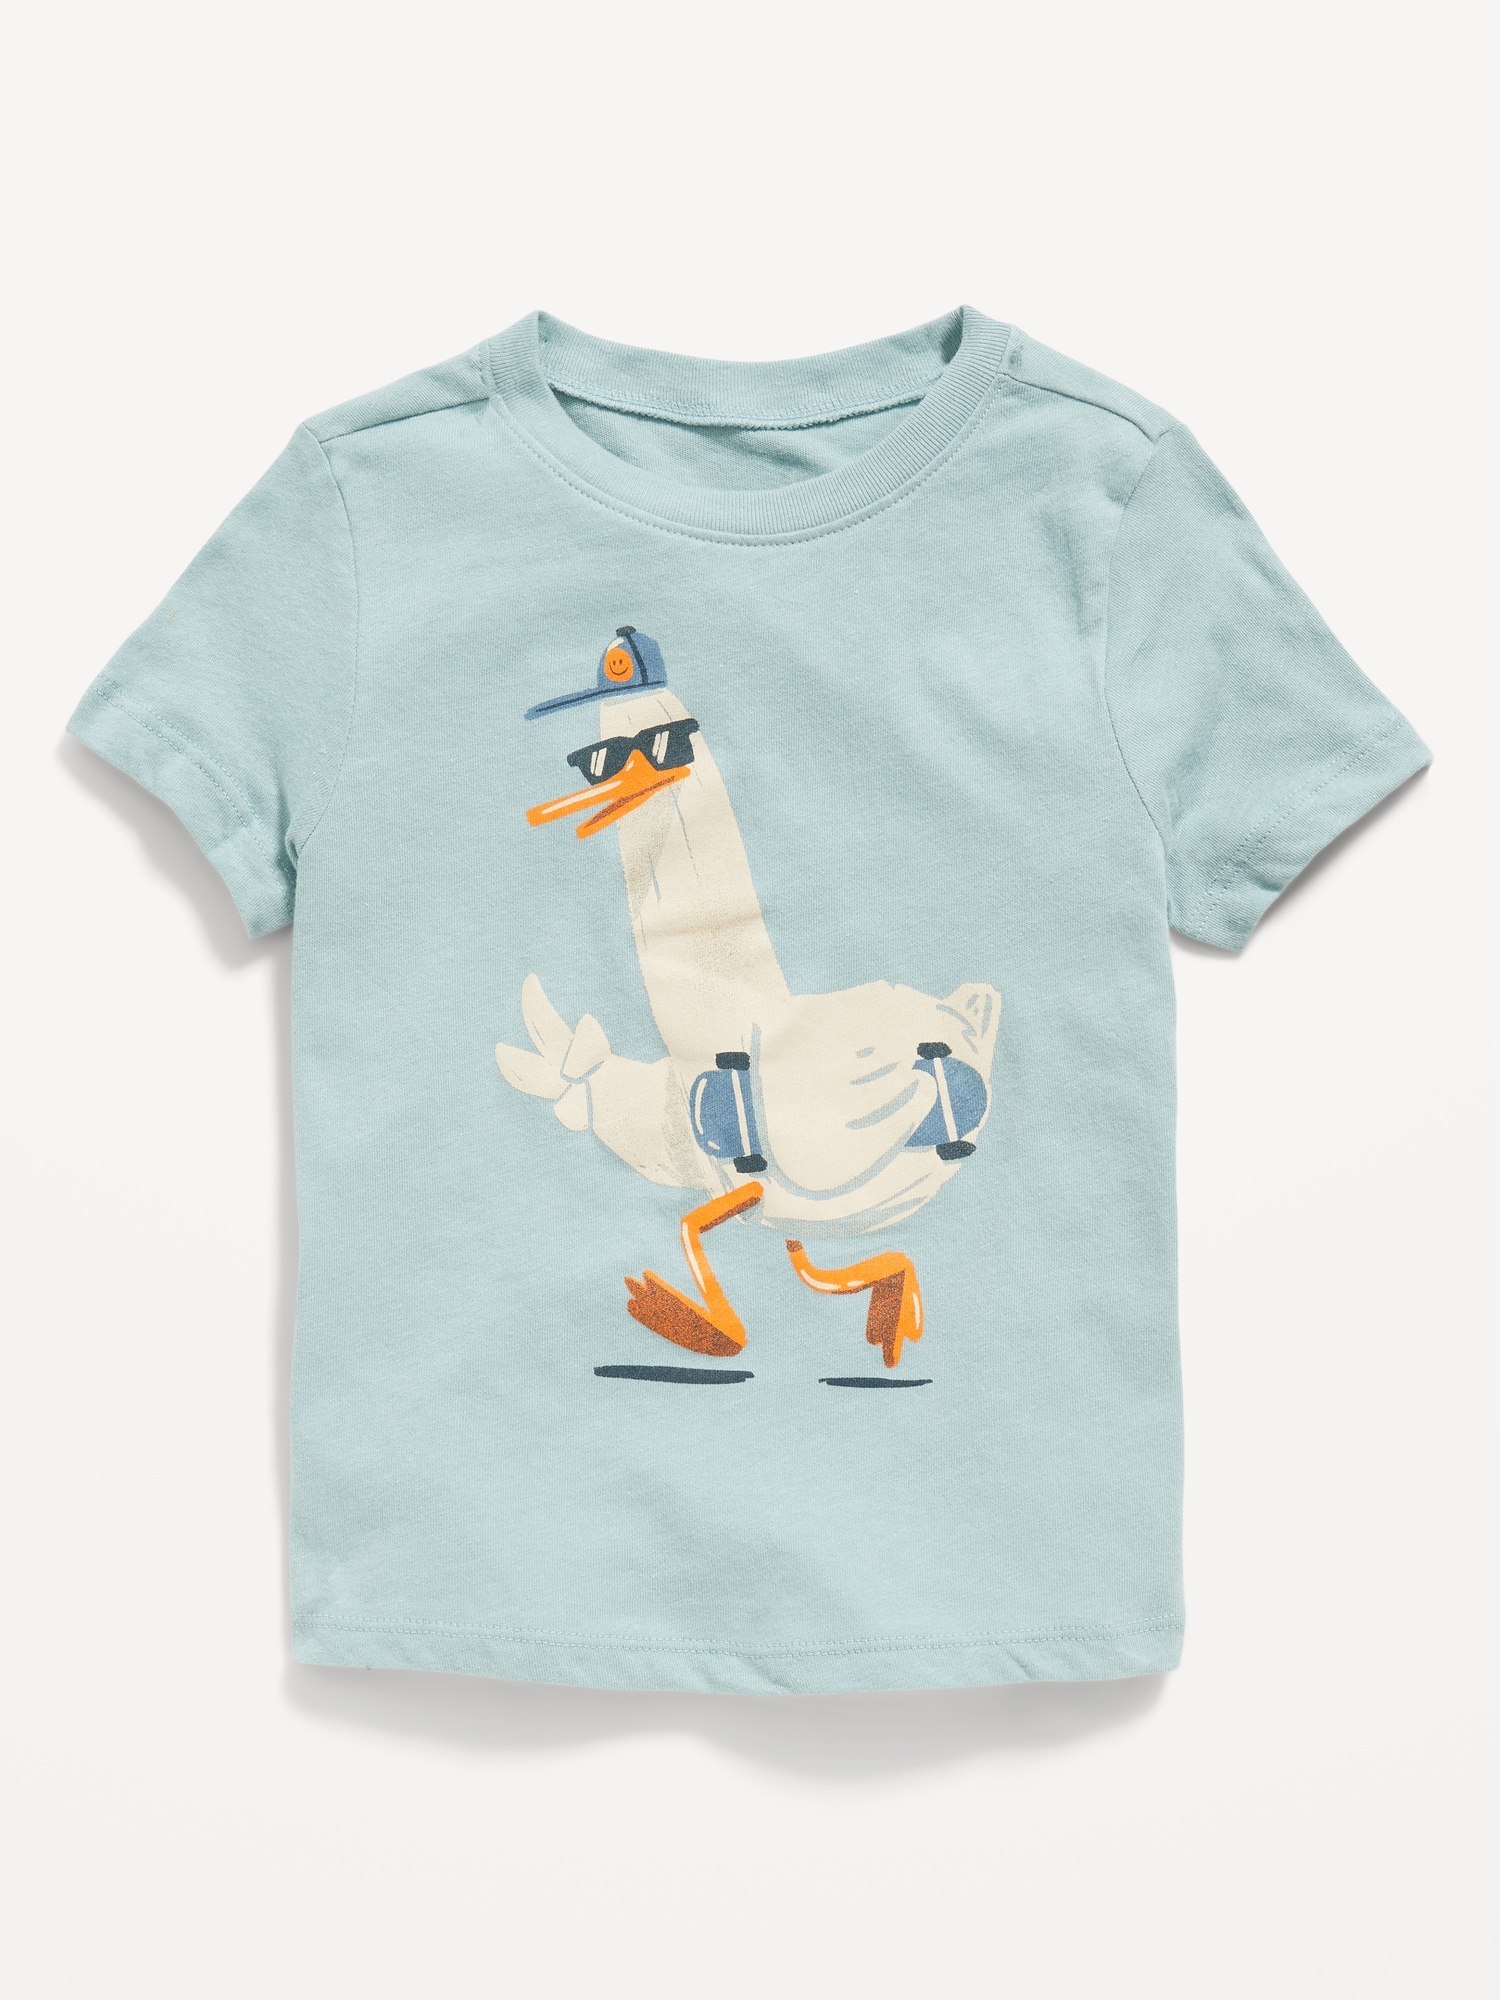 Unisex Graphic T-Shirt for Toddler Hot Deal